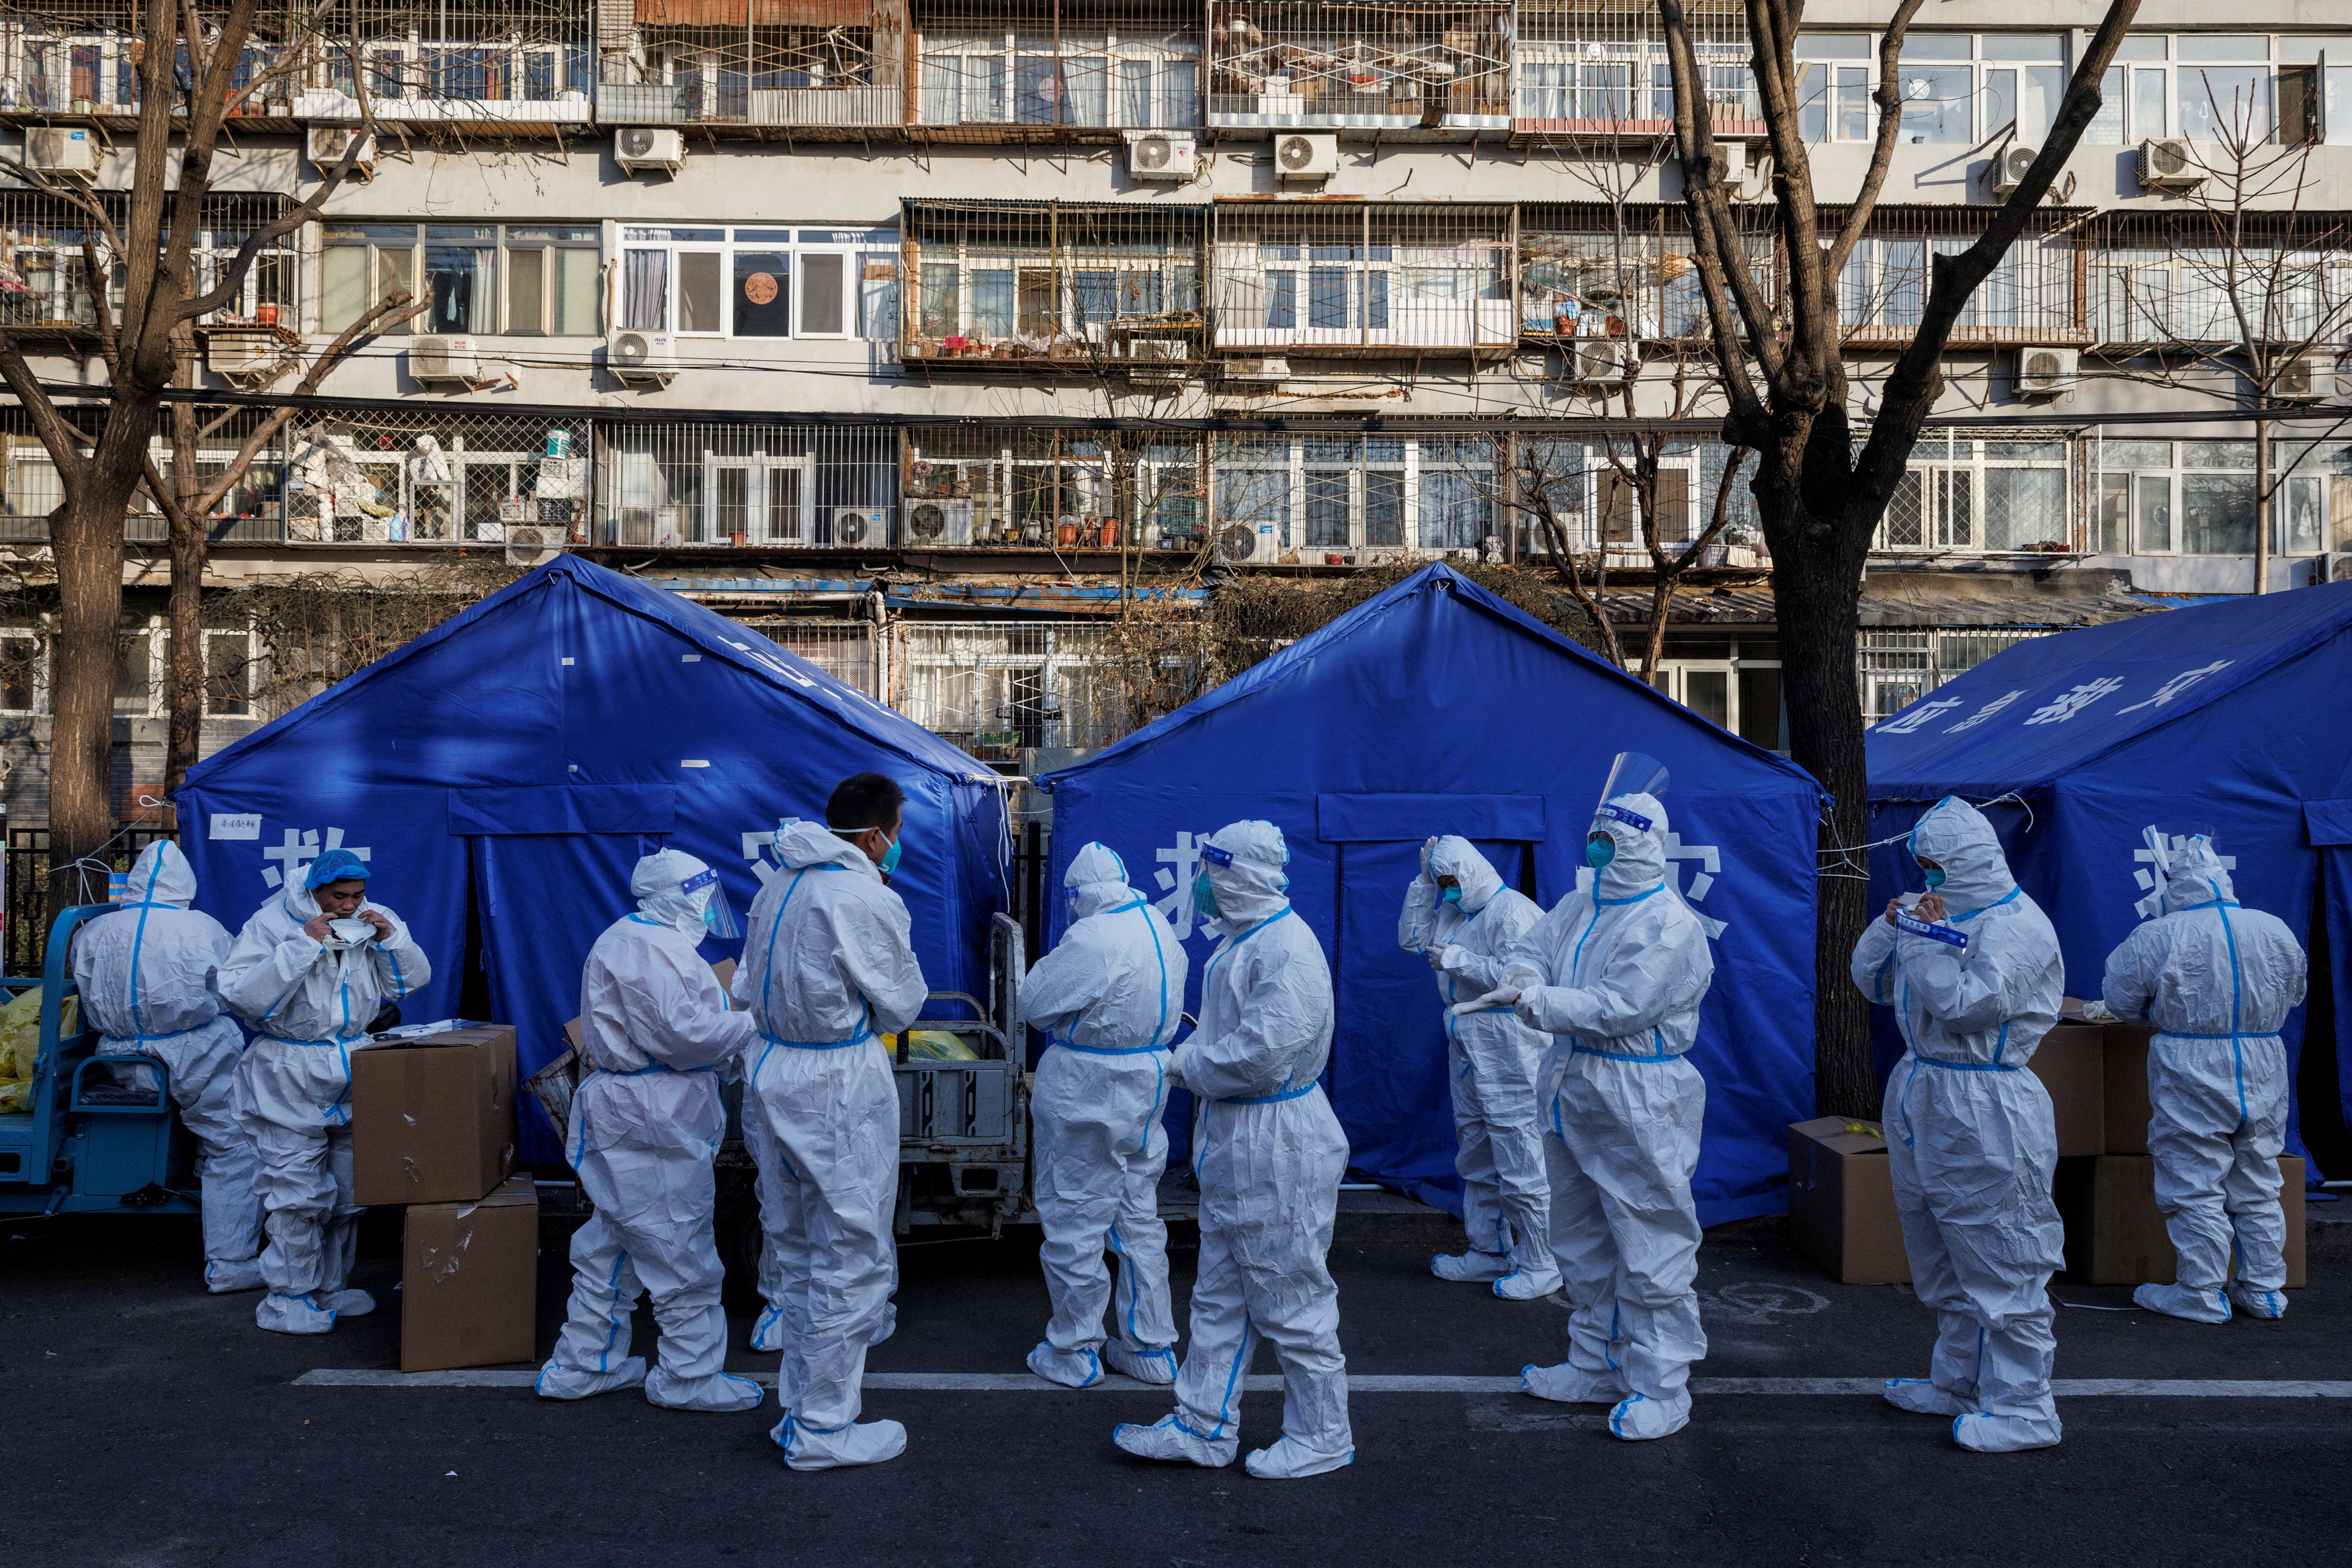 Pandemic workers in white hazmat suits gather in front of a block of flats in Beijing where people are under home quarantine. They are standing in front of blue tents and are about to begin their shift.